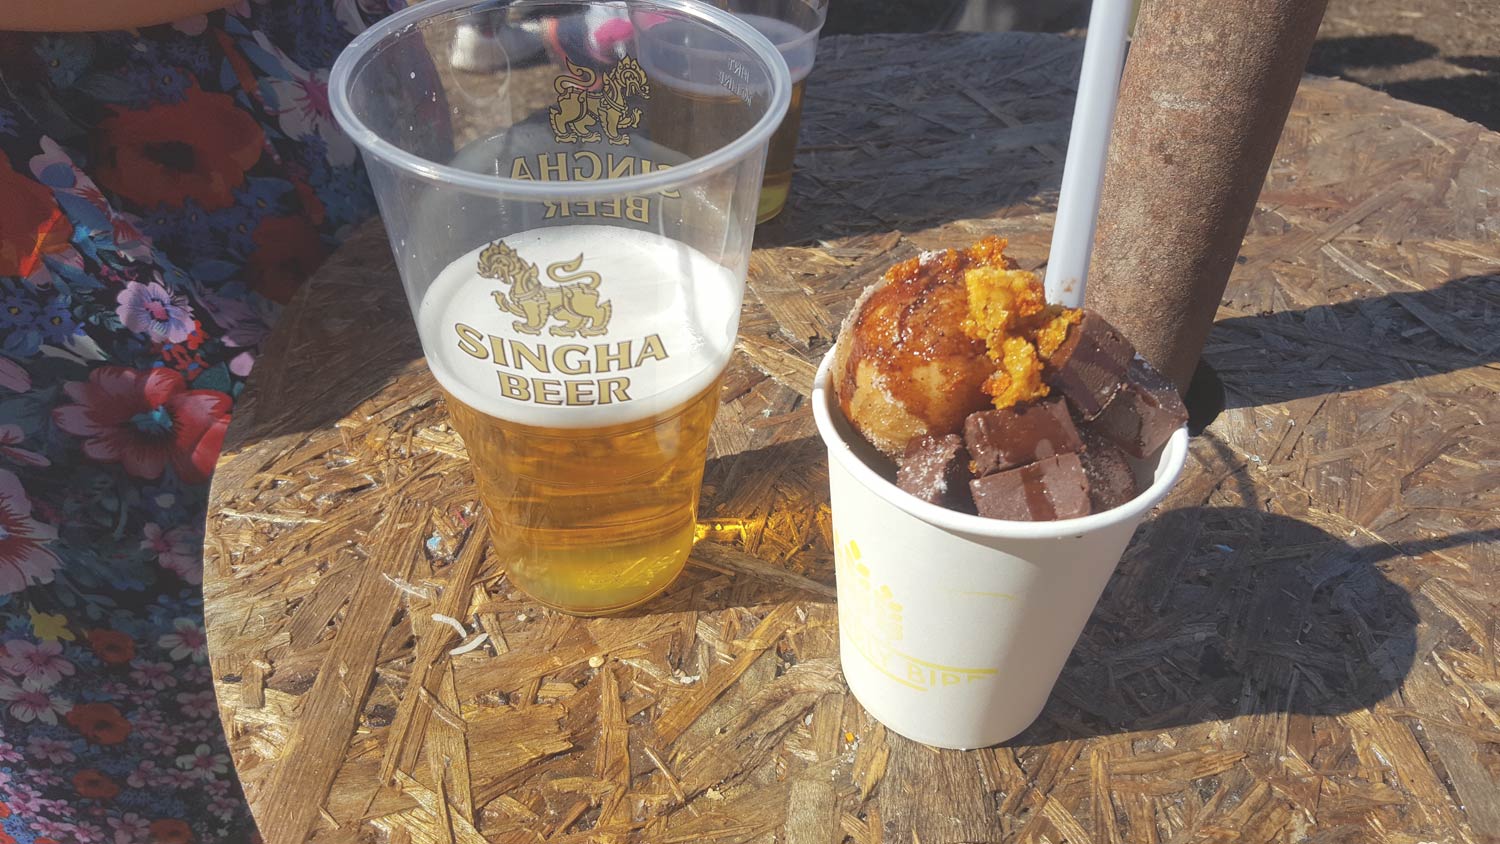 Review of the mini dough bites with chocolate sauce at Street Food Circus in Cardiff